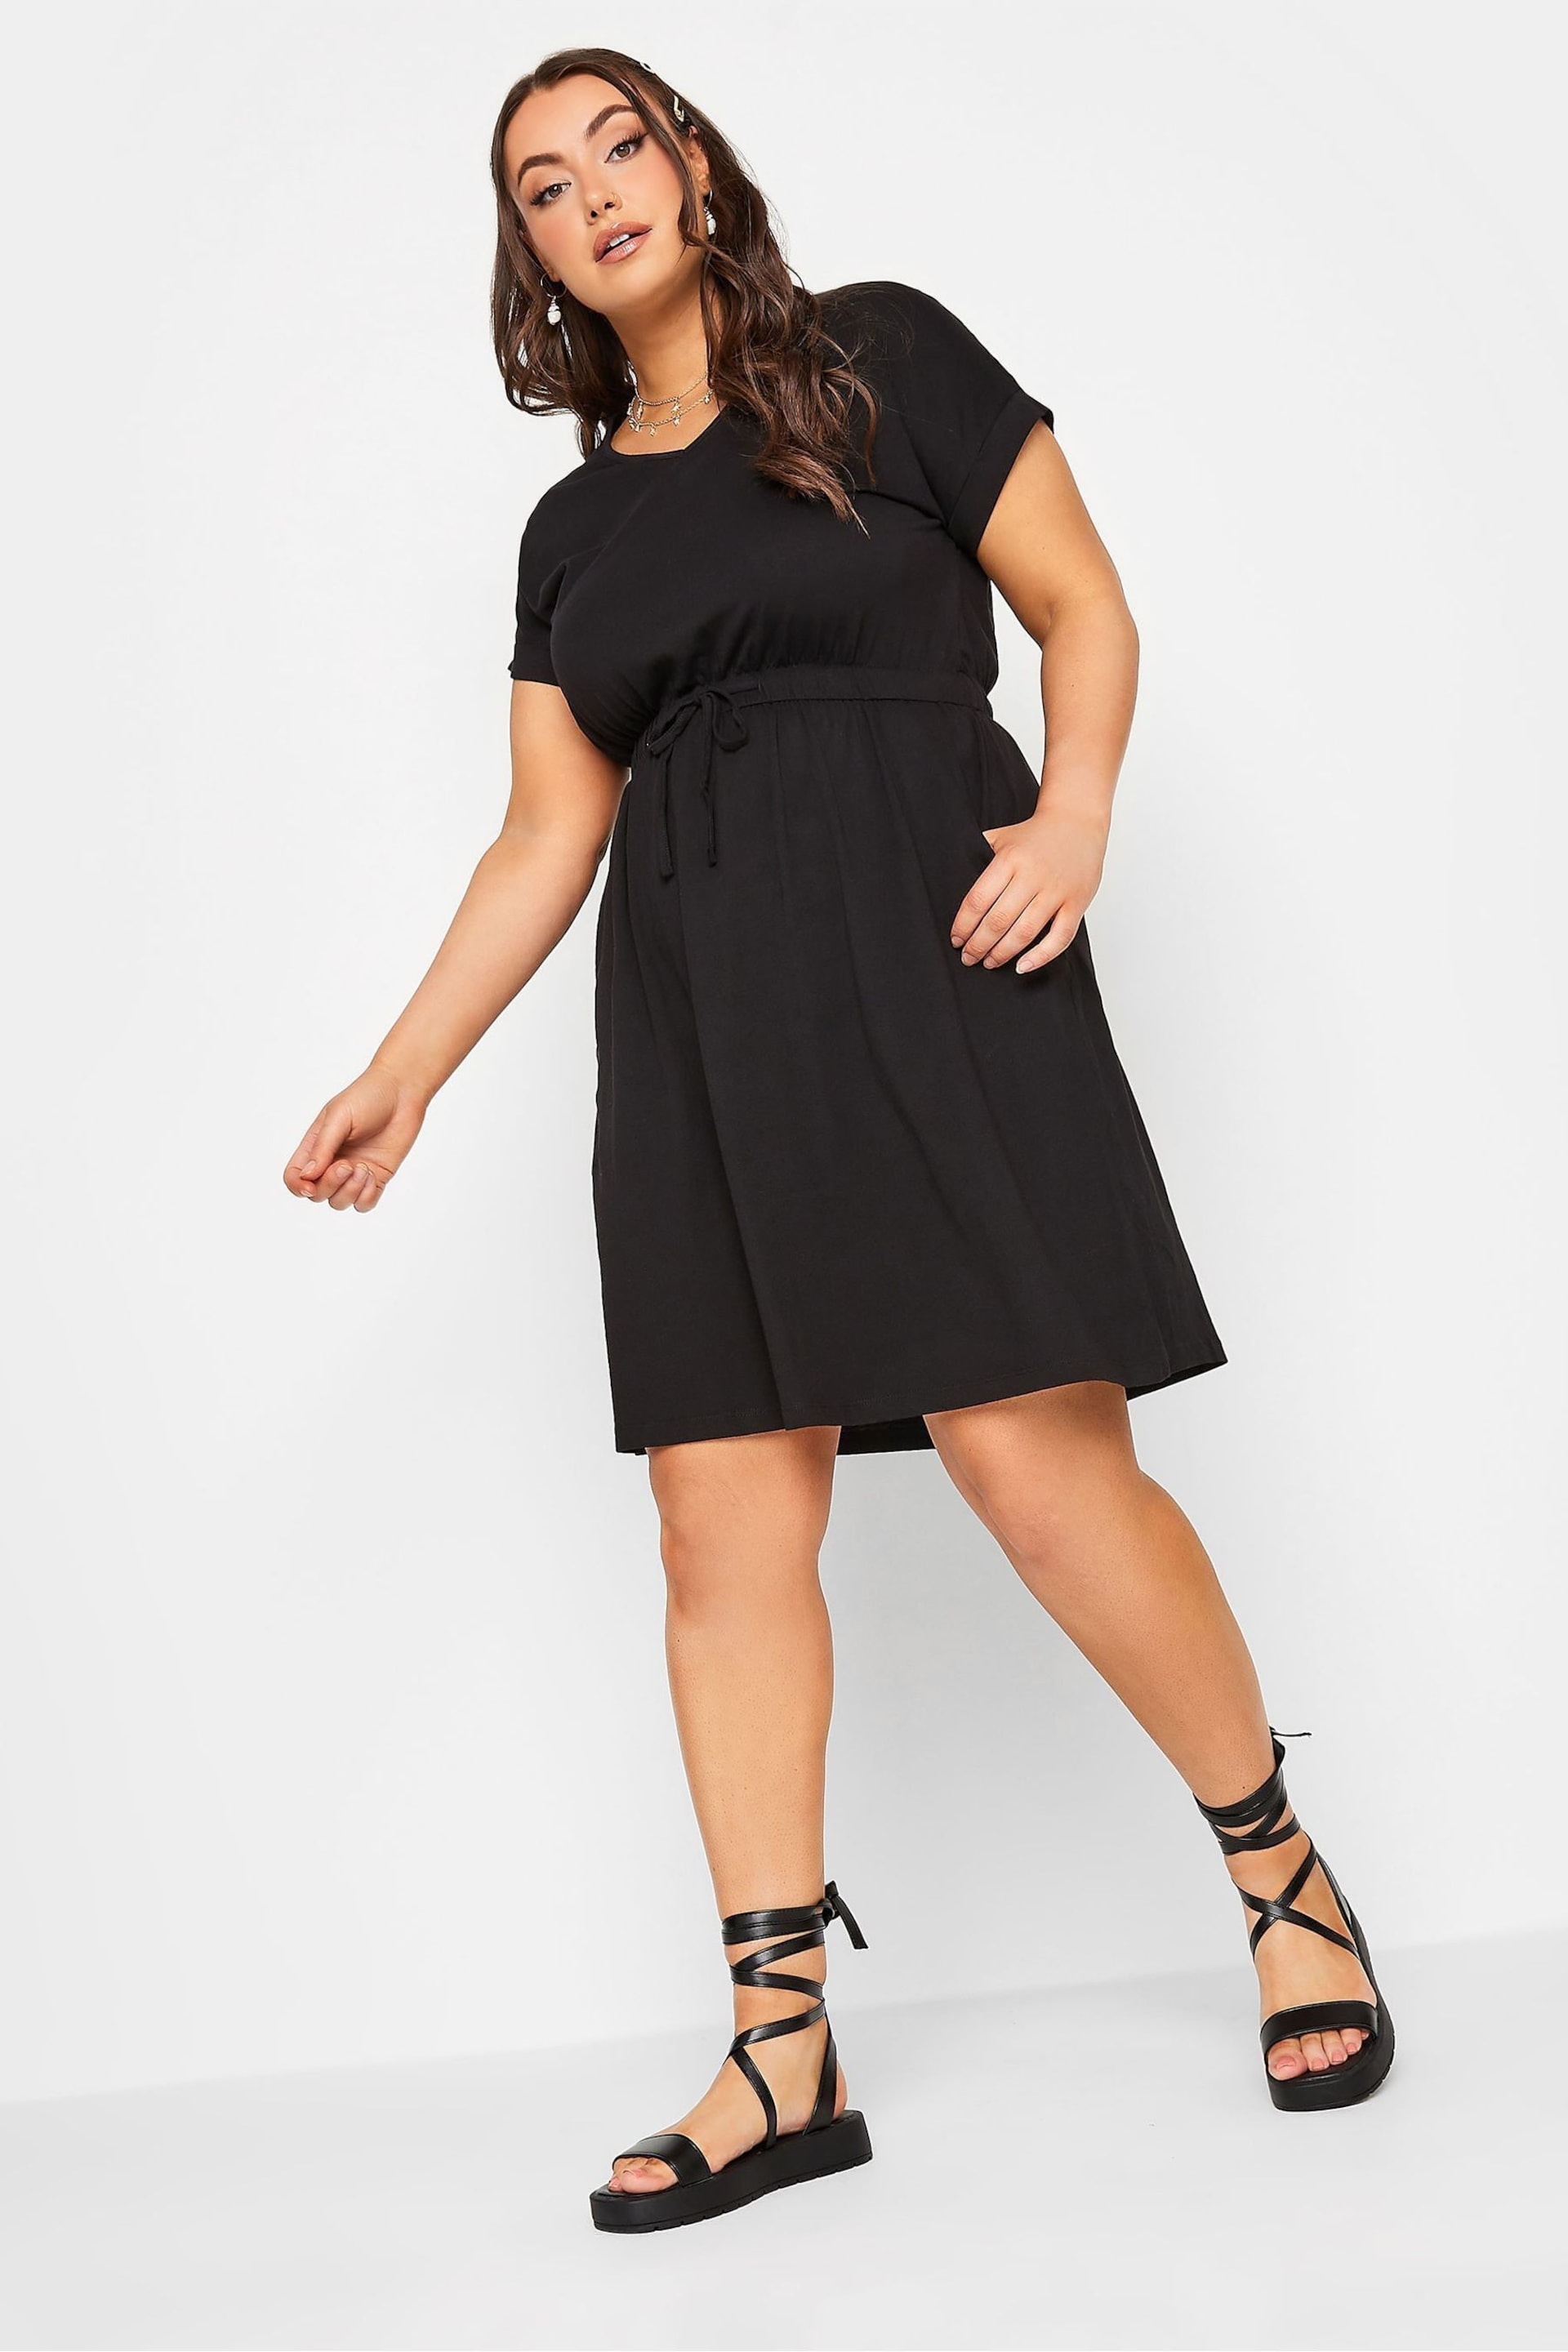 Yours Curve Black T-Shirt Drawcord Dress - Image 1 of 5